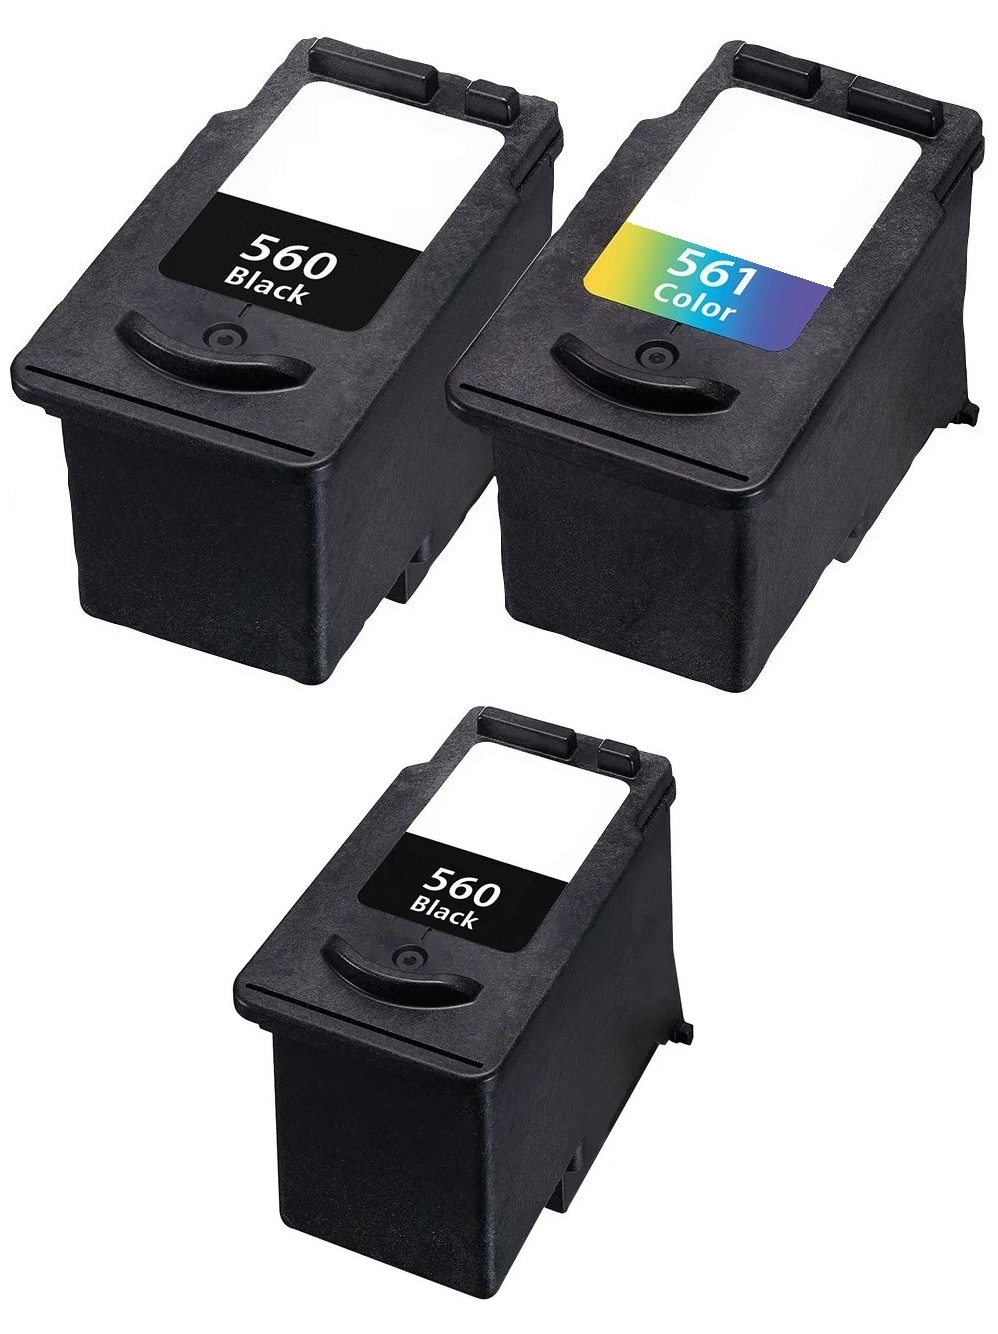 2 x Canon PG-560 and 1 x CL-561 Black and Colour Remanufactured Ink Cartridges